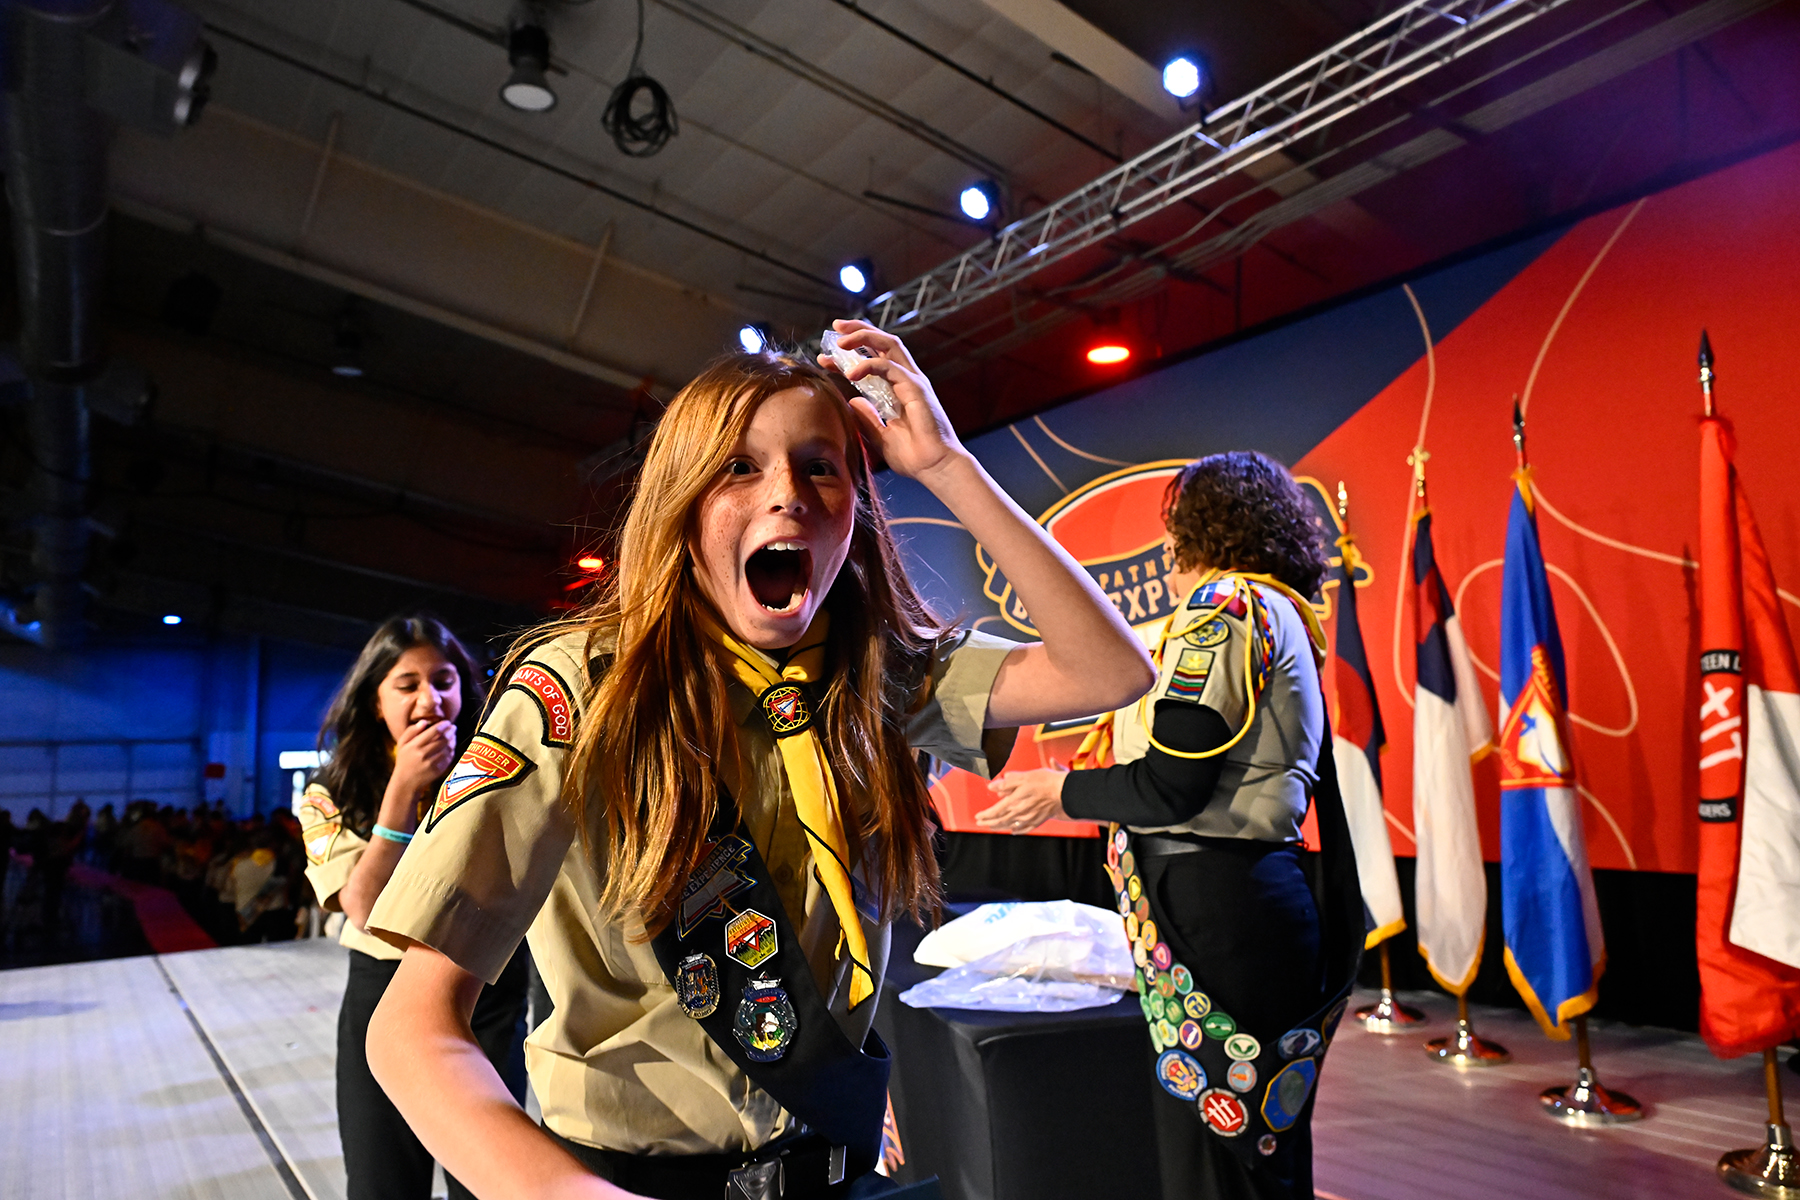 A young girl in a Pathfinder uniform looking thrilled after picking up an award. Another girl and leader in the background.